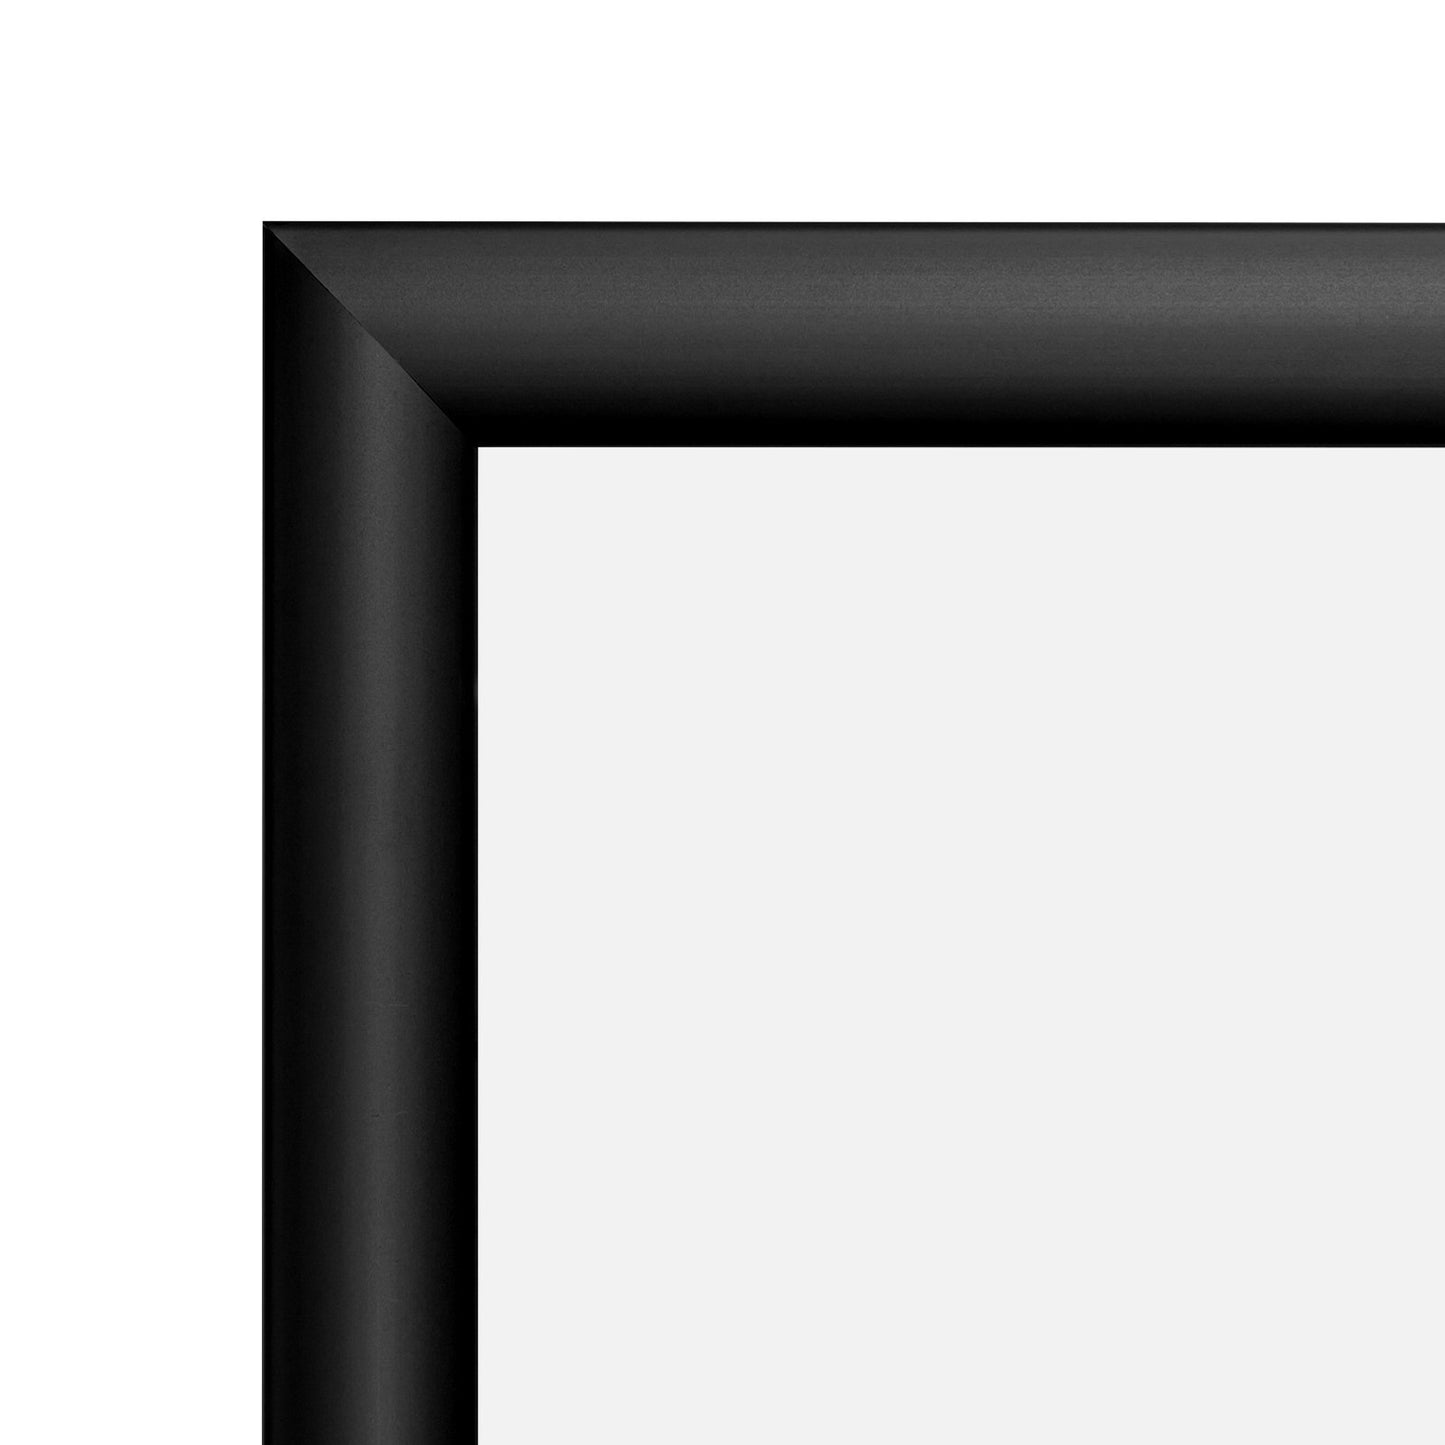 Load image into Gallery viewer, 17x38 Black SnapeZo® Snap Frame - 1.2 Inch Profile
